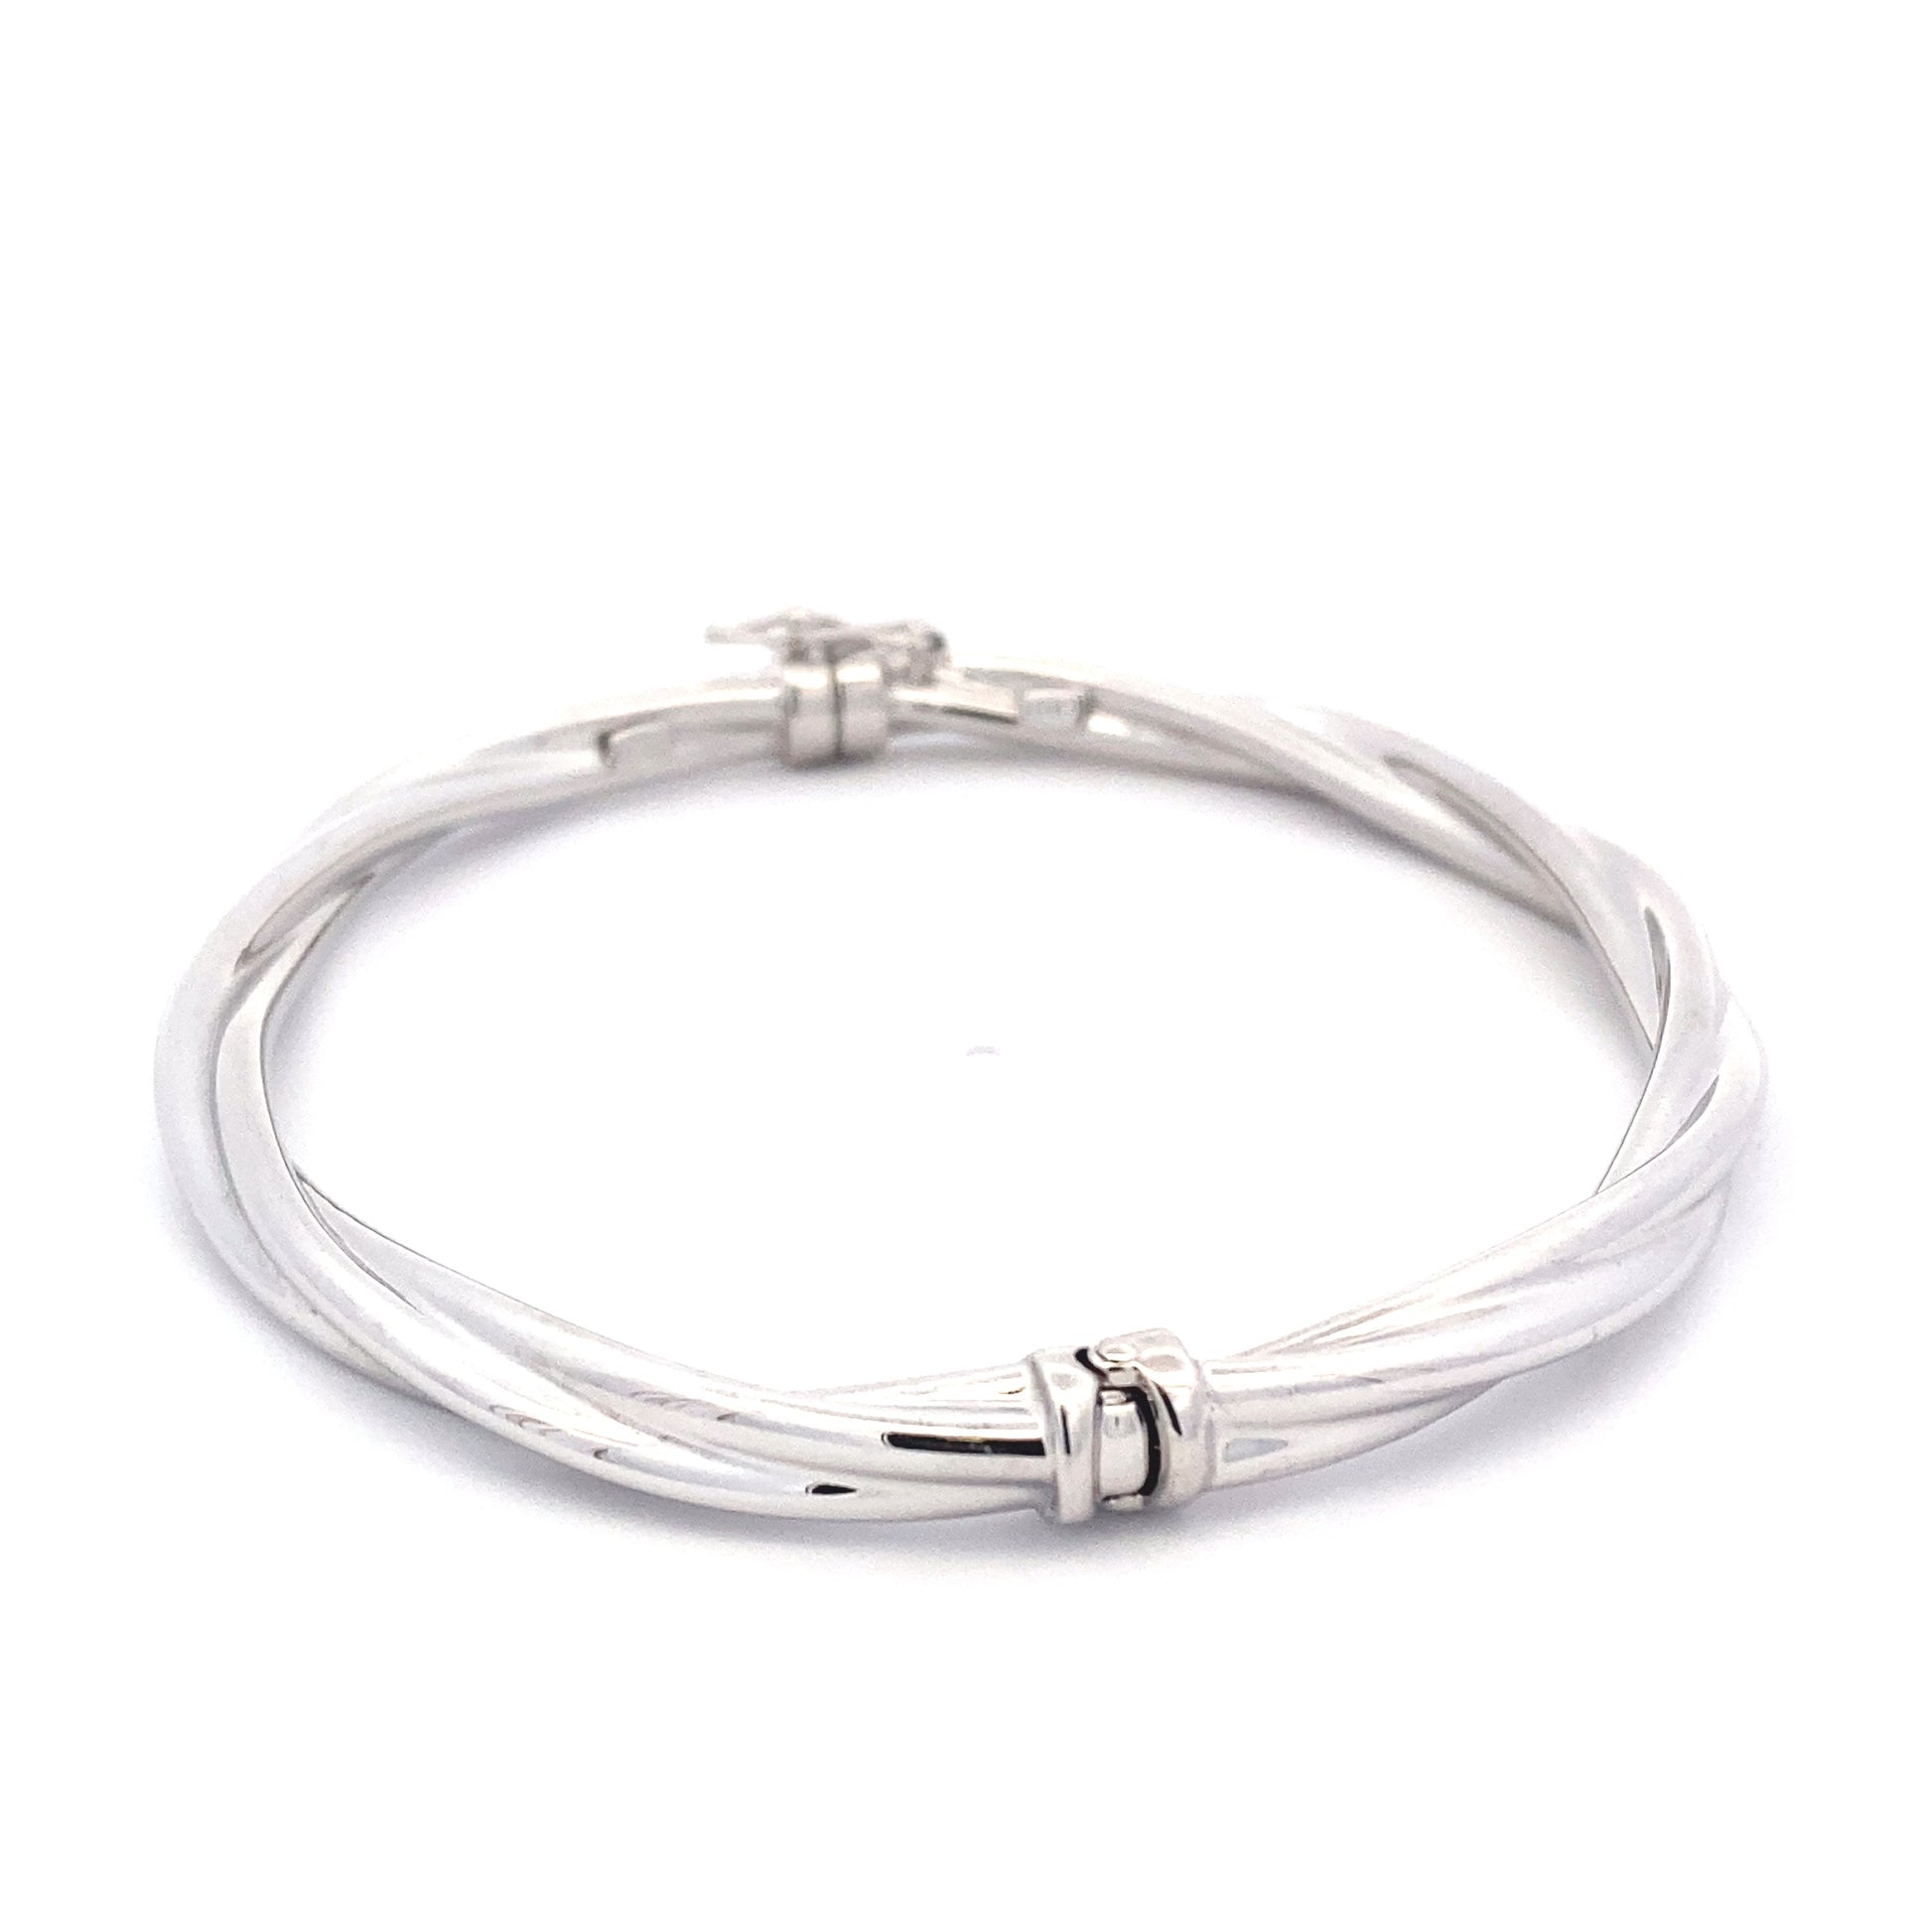 White Gold Twisted Bangle  Gardiner Brothers   